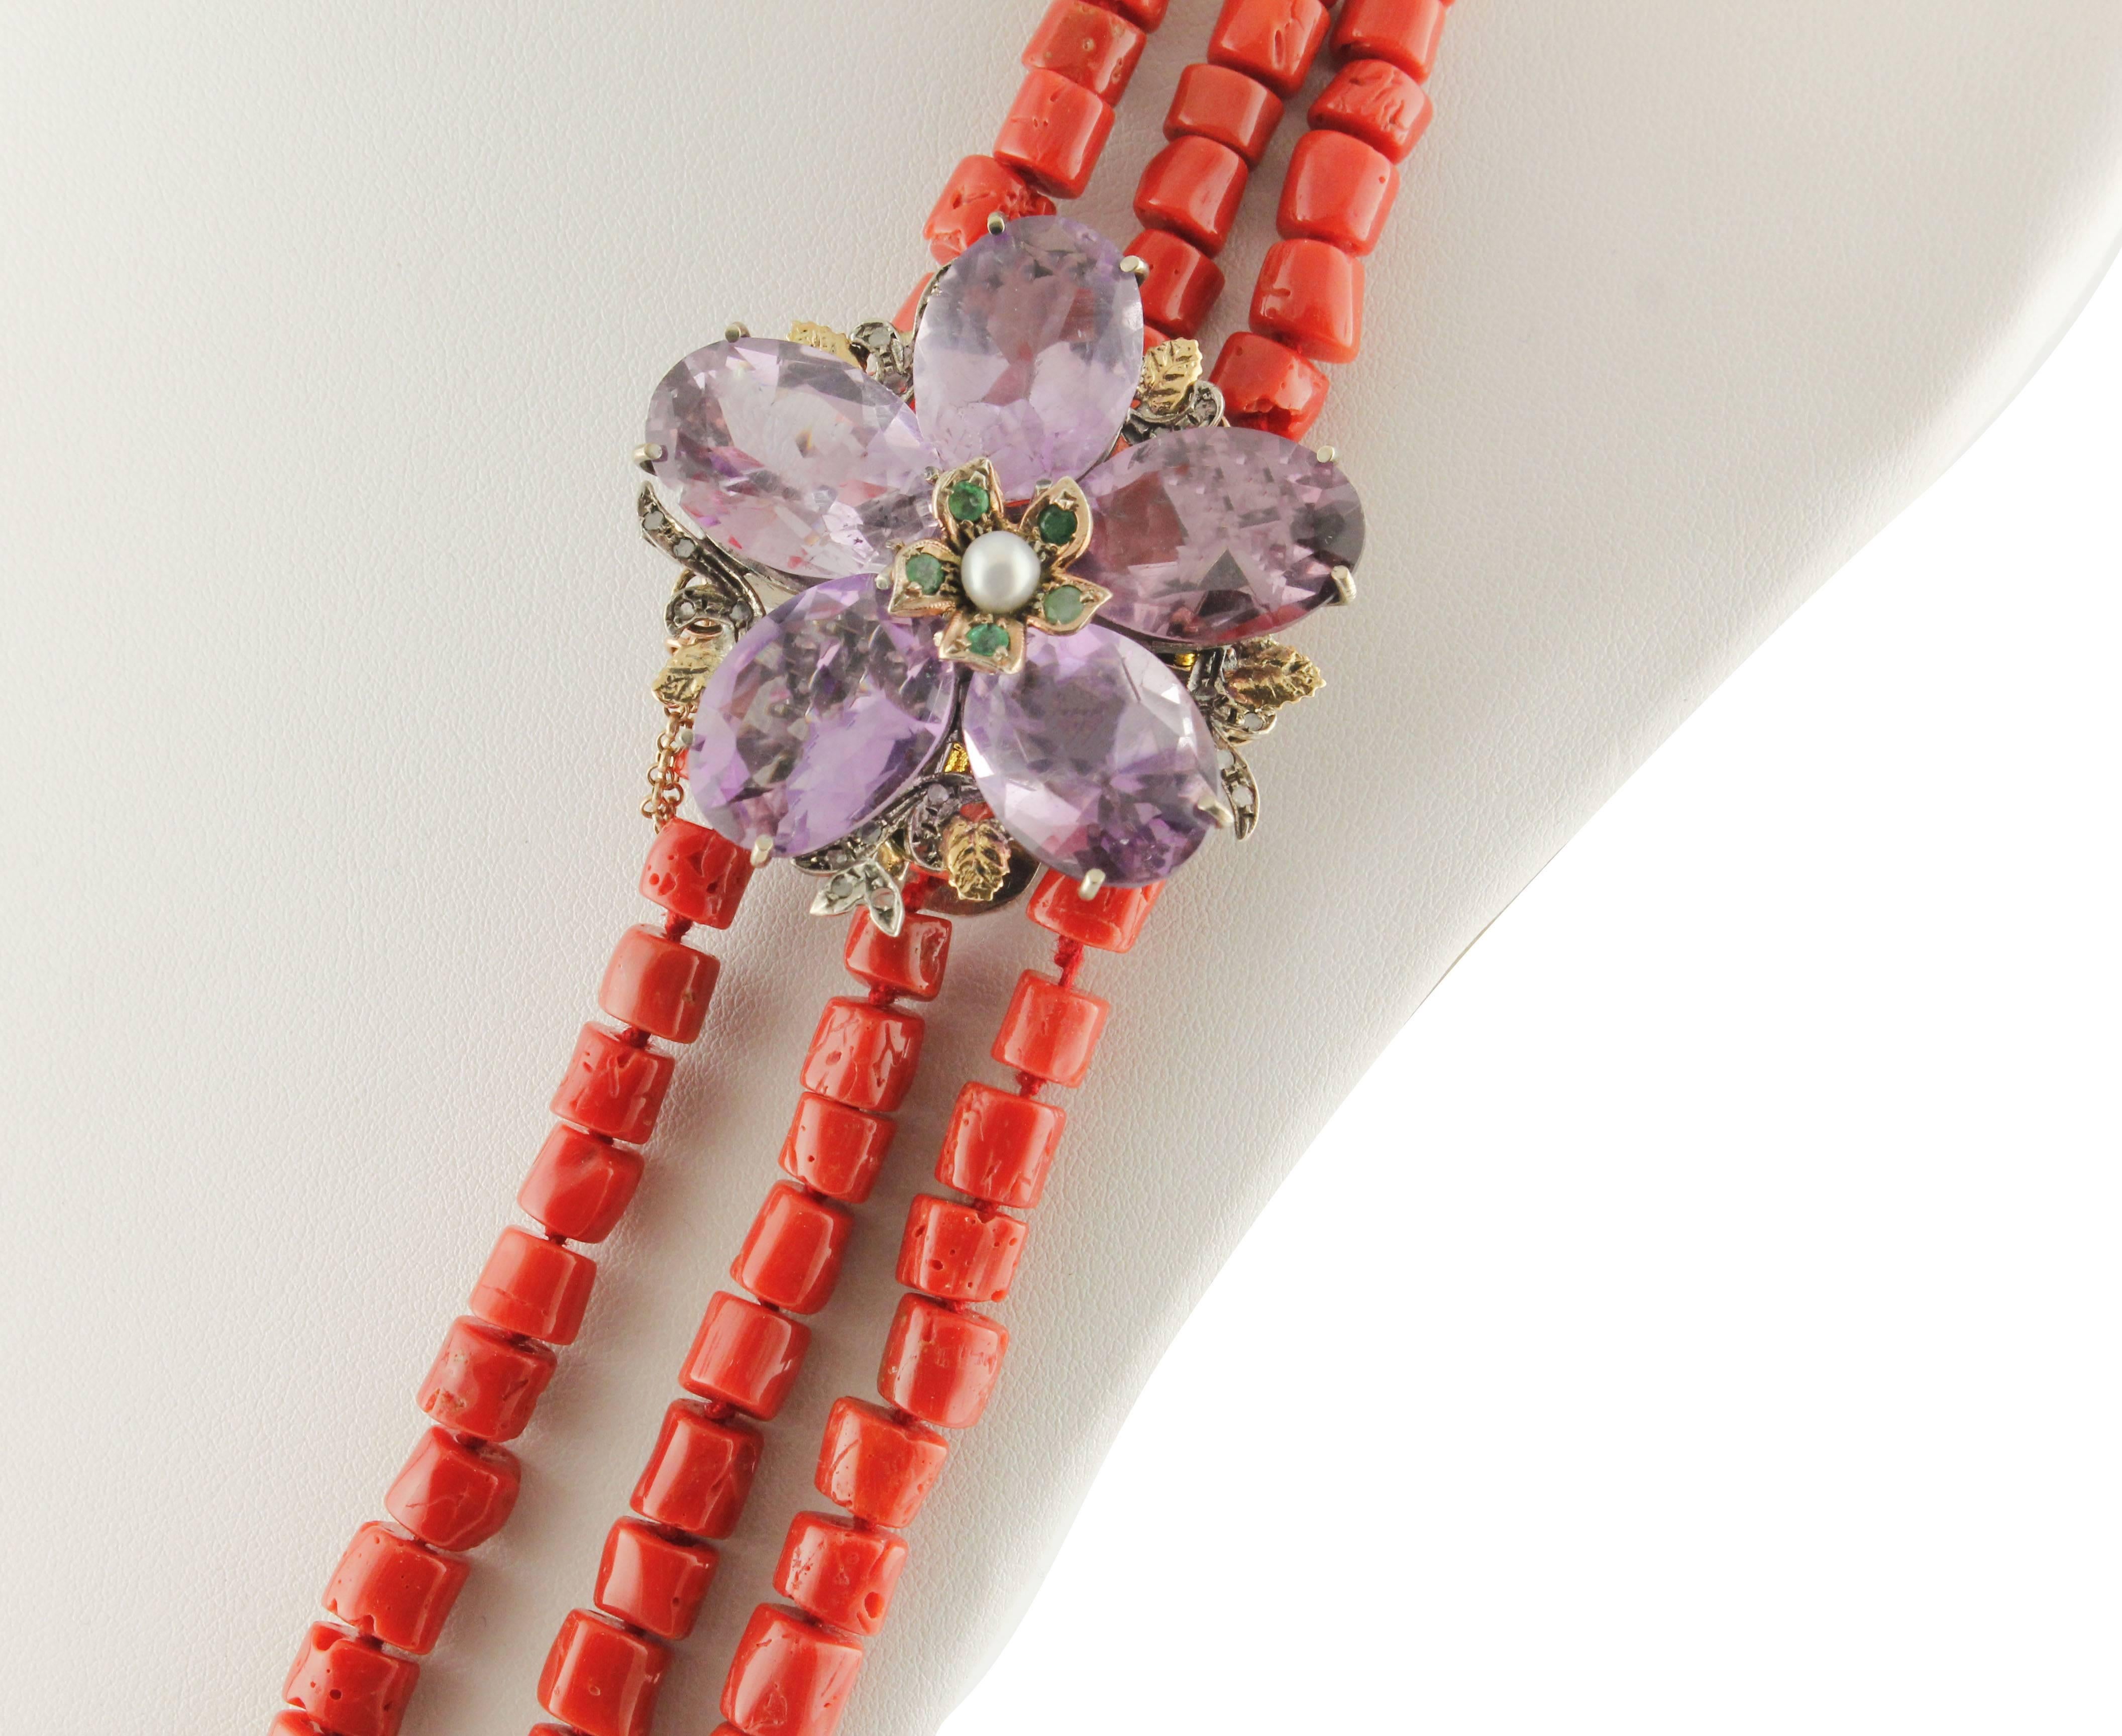 Fabulous coral necklace from g 160.2 with flower-shaped clasp in 9k rose gold and silver, with amethyst petals of c 50.5, studded with antique diamonds from c 0.19 emeralds from c 0.63 and a central pearl of g 0.10. Total weight g 187.60.
Coral g